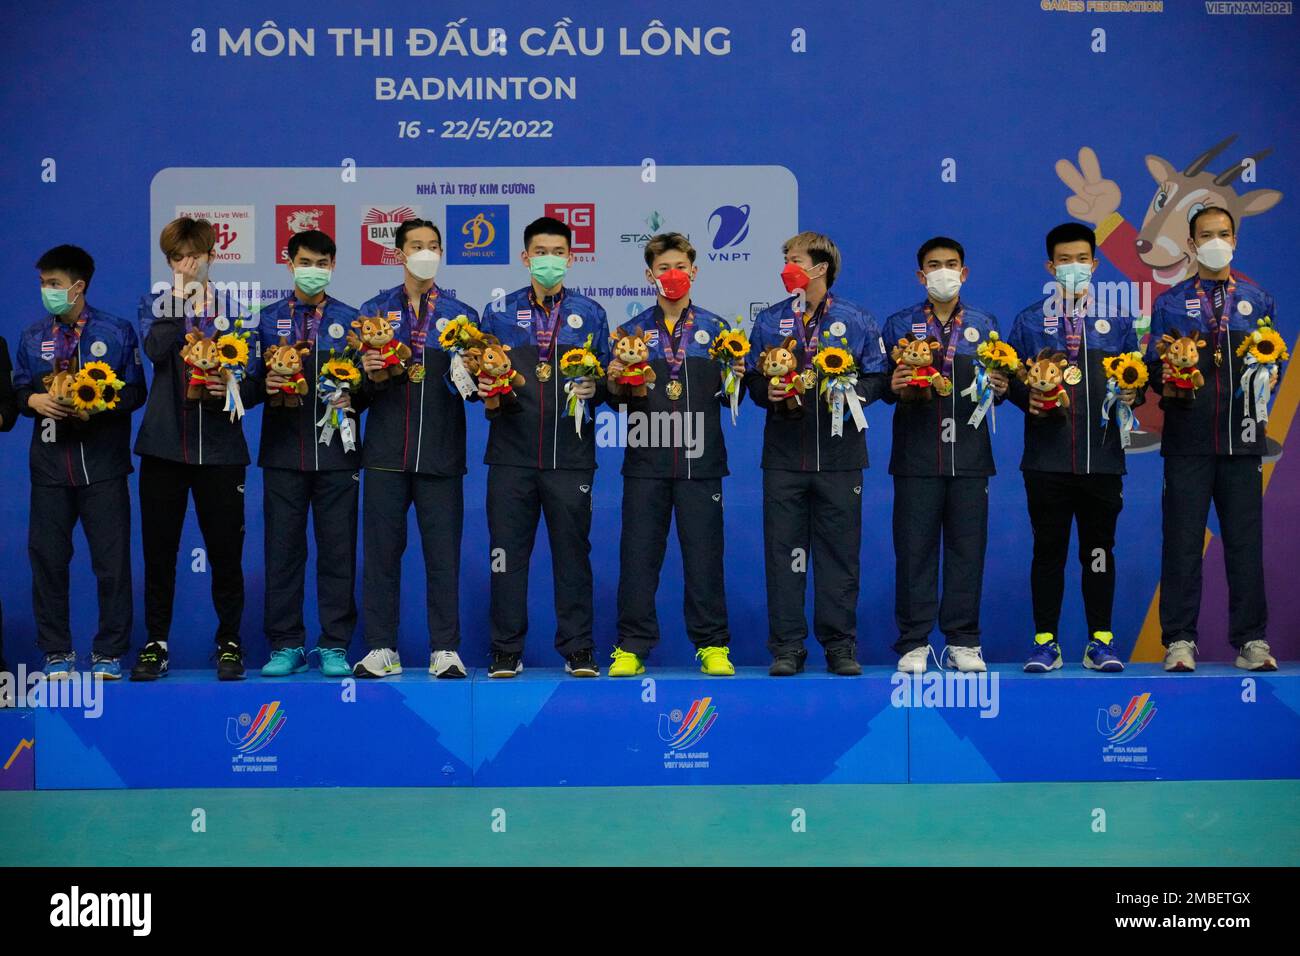 Team Thailand celebrates on the podium with their gold medals after defeating Malaysia in their mens team badminton final match at the 31st Southeast Asian Games (SEA Games), Wednesday, May 18, 2022